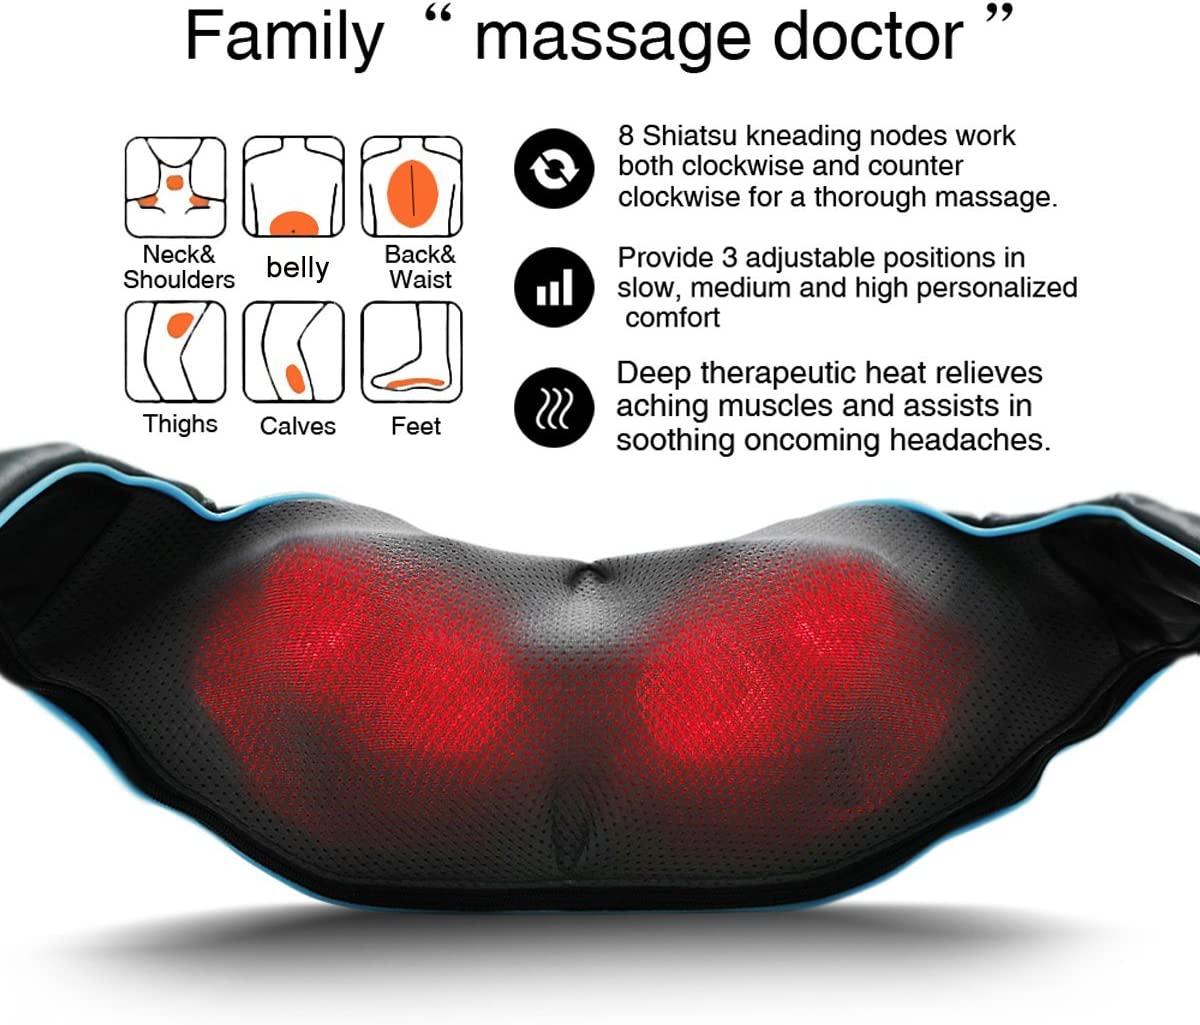  Massager with Heat - Deep Tissue Kneading Electric Back Massage  for Neck, Back, Shoulder, Waist, Foot - Shiatsu Full Body Massage, Relax  Gift for Her/Him/Friend/Dad/Mom : Health & Household